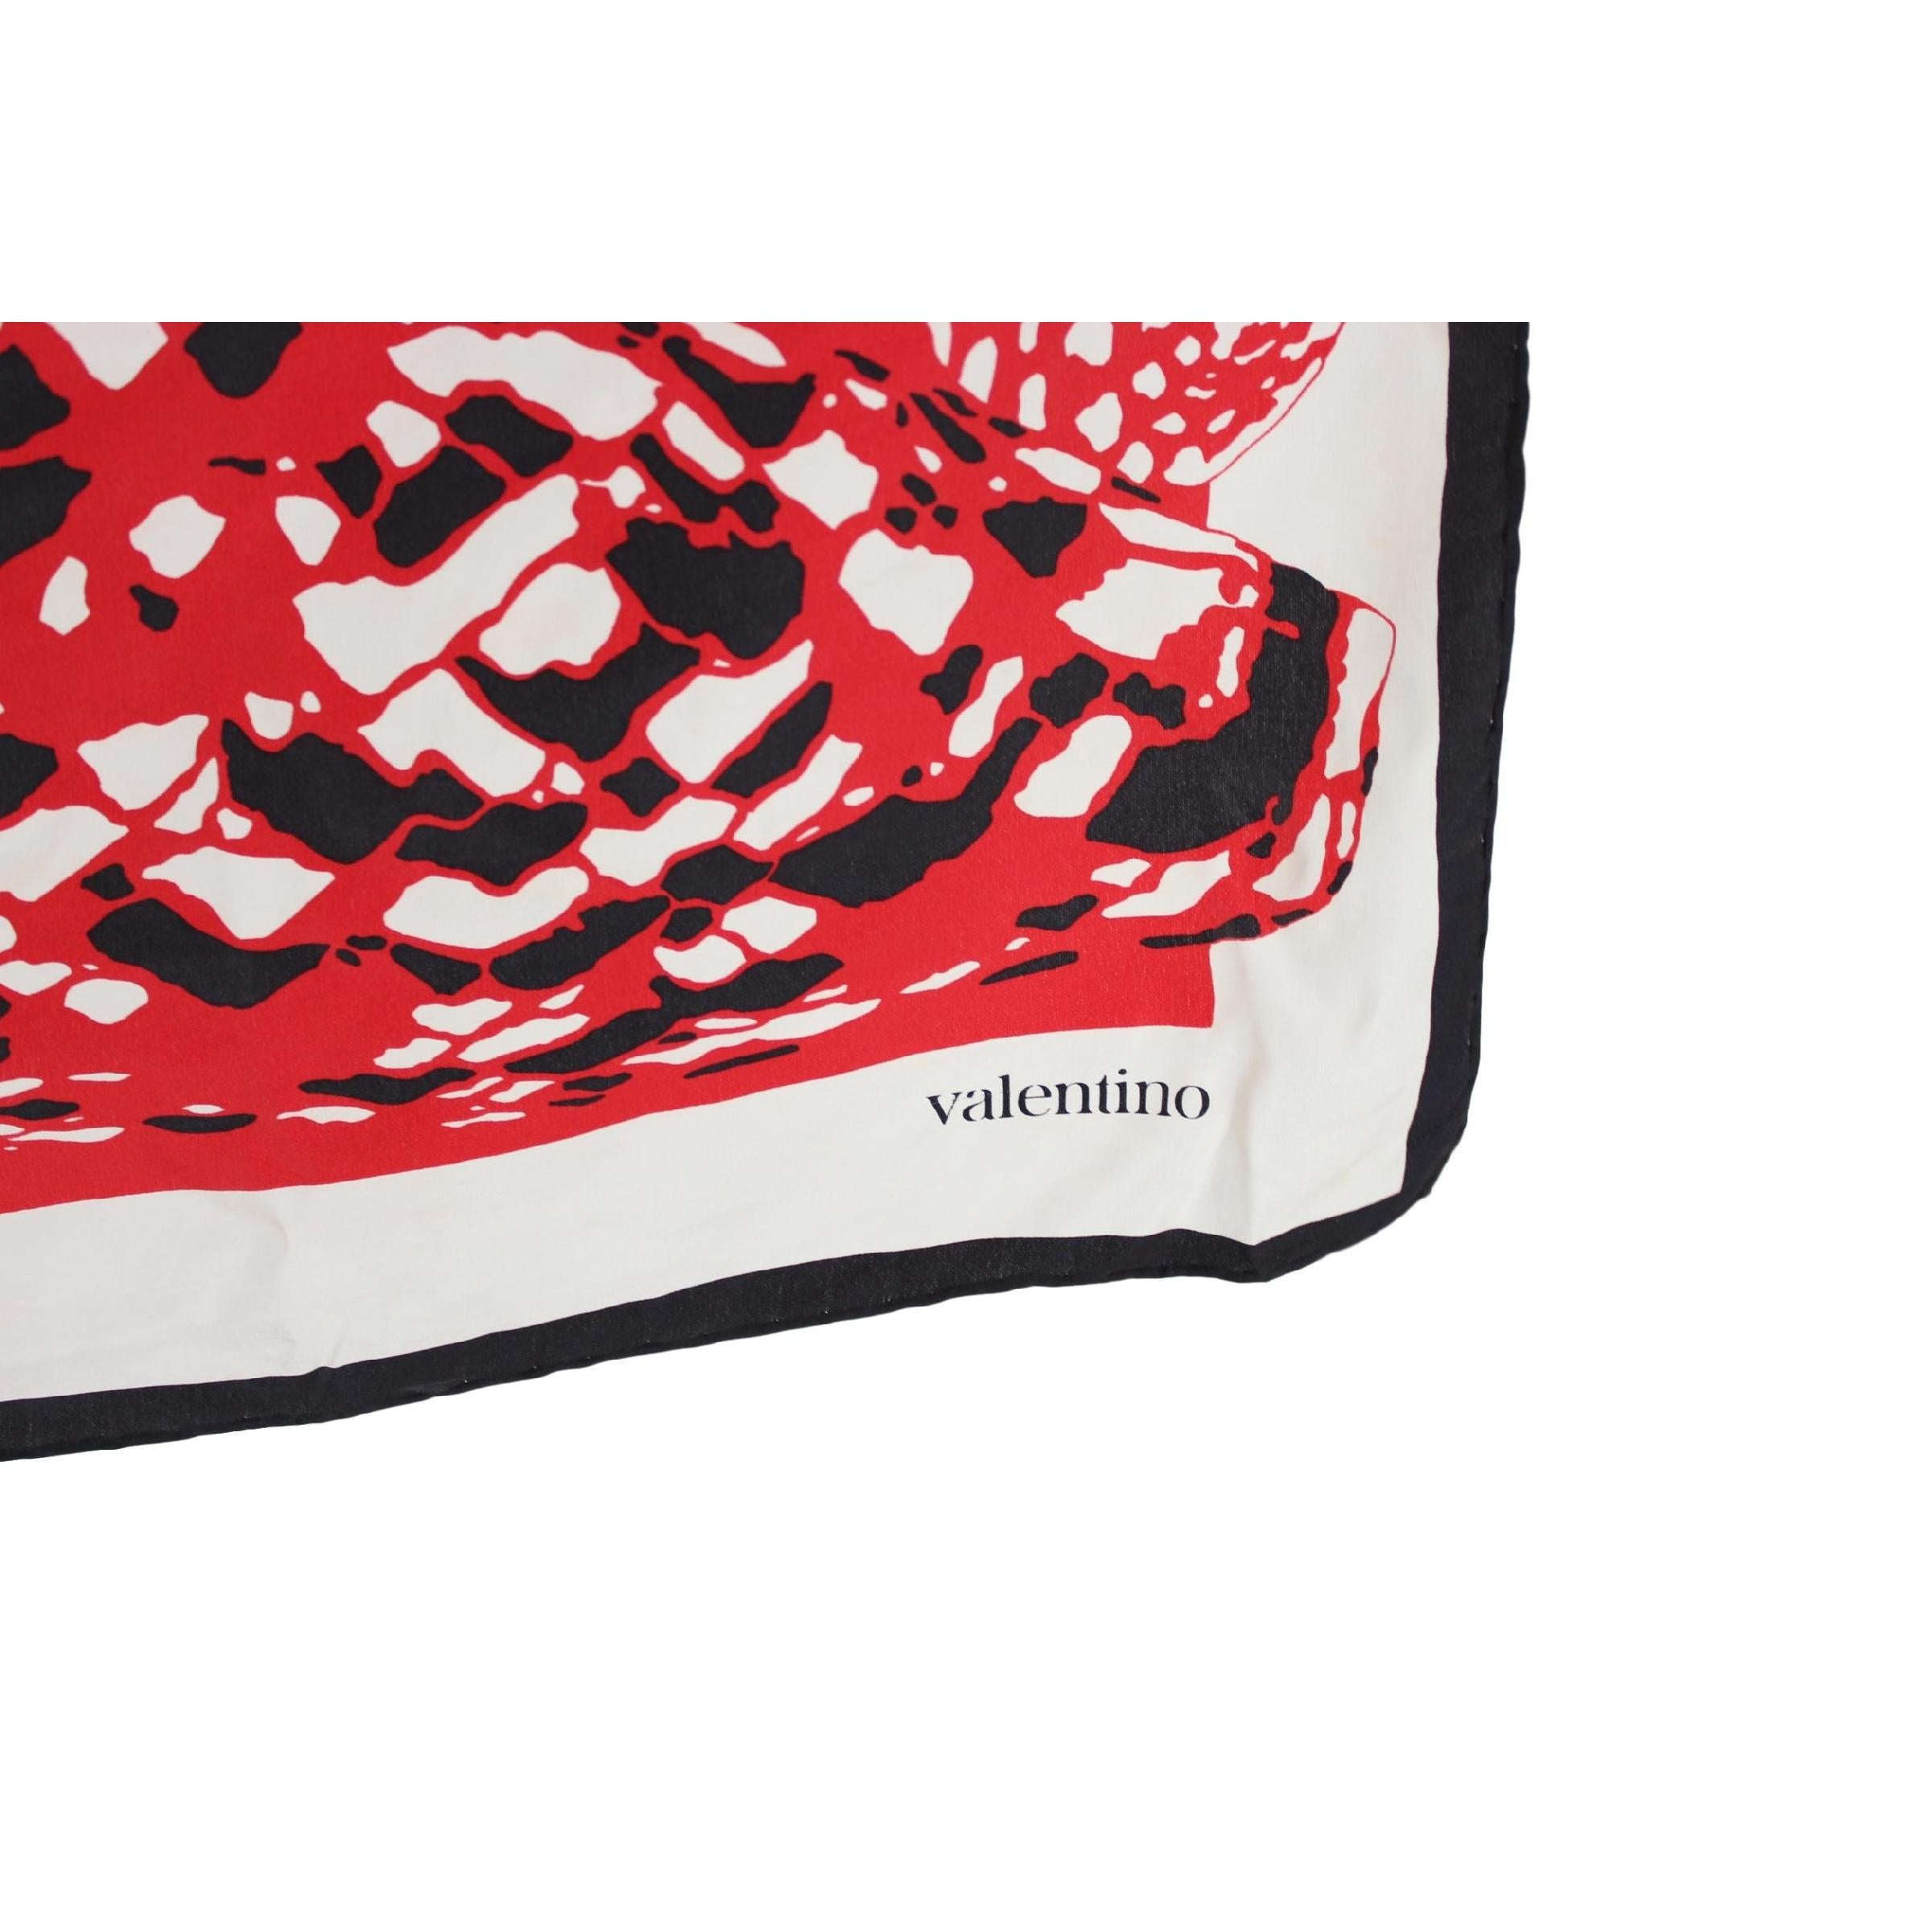 Valentino silk scarf. Red and black geometric designs on a white background. Made in Italy. Excellent vintage conditions.

Measures: 84 x 84 cm